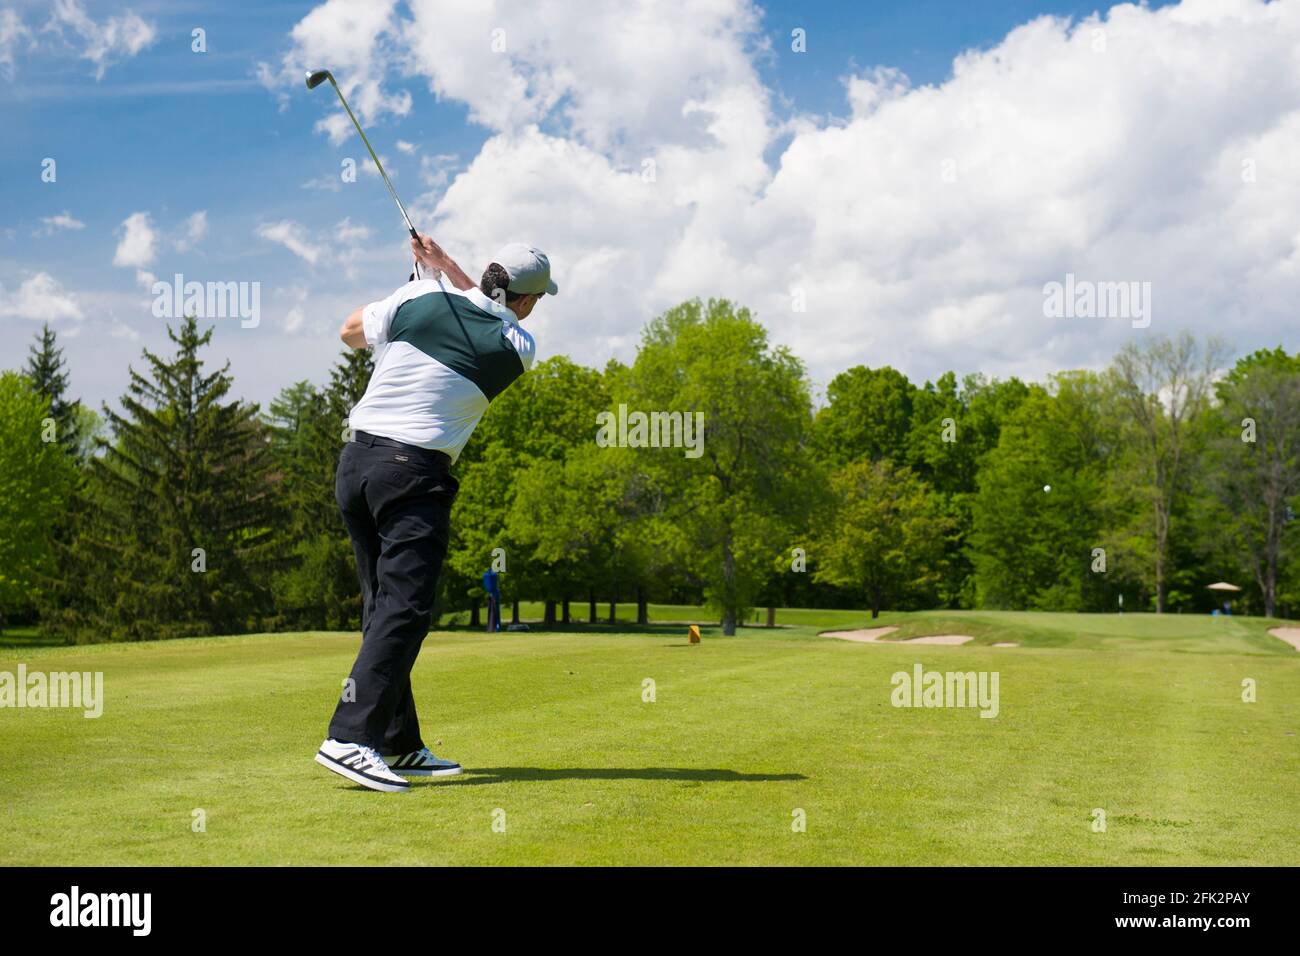 A golfer watches his ball flying towards the green. Stock Photo